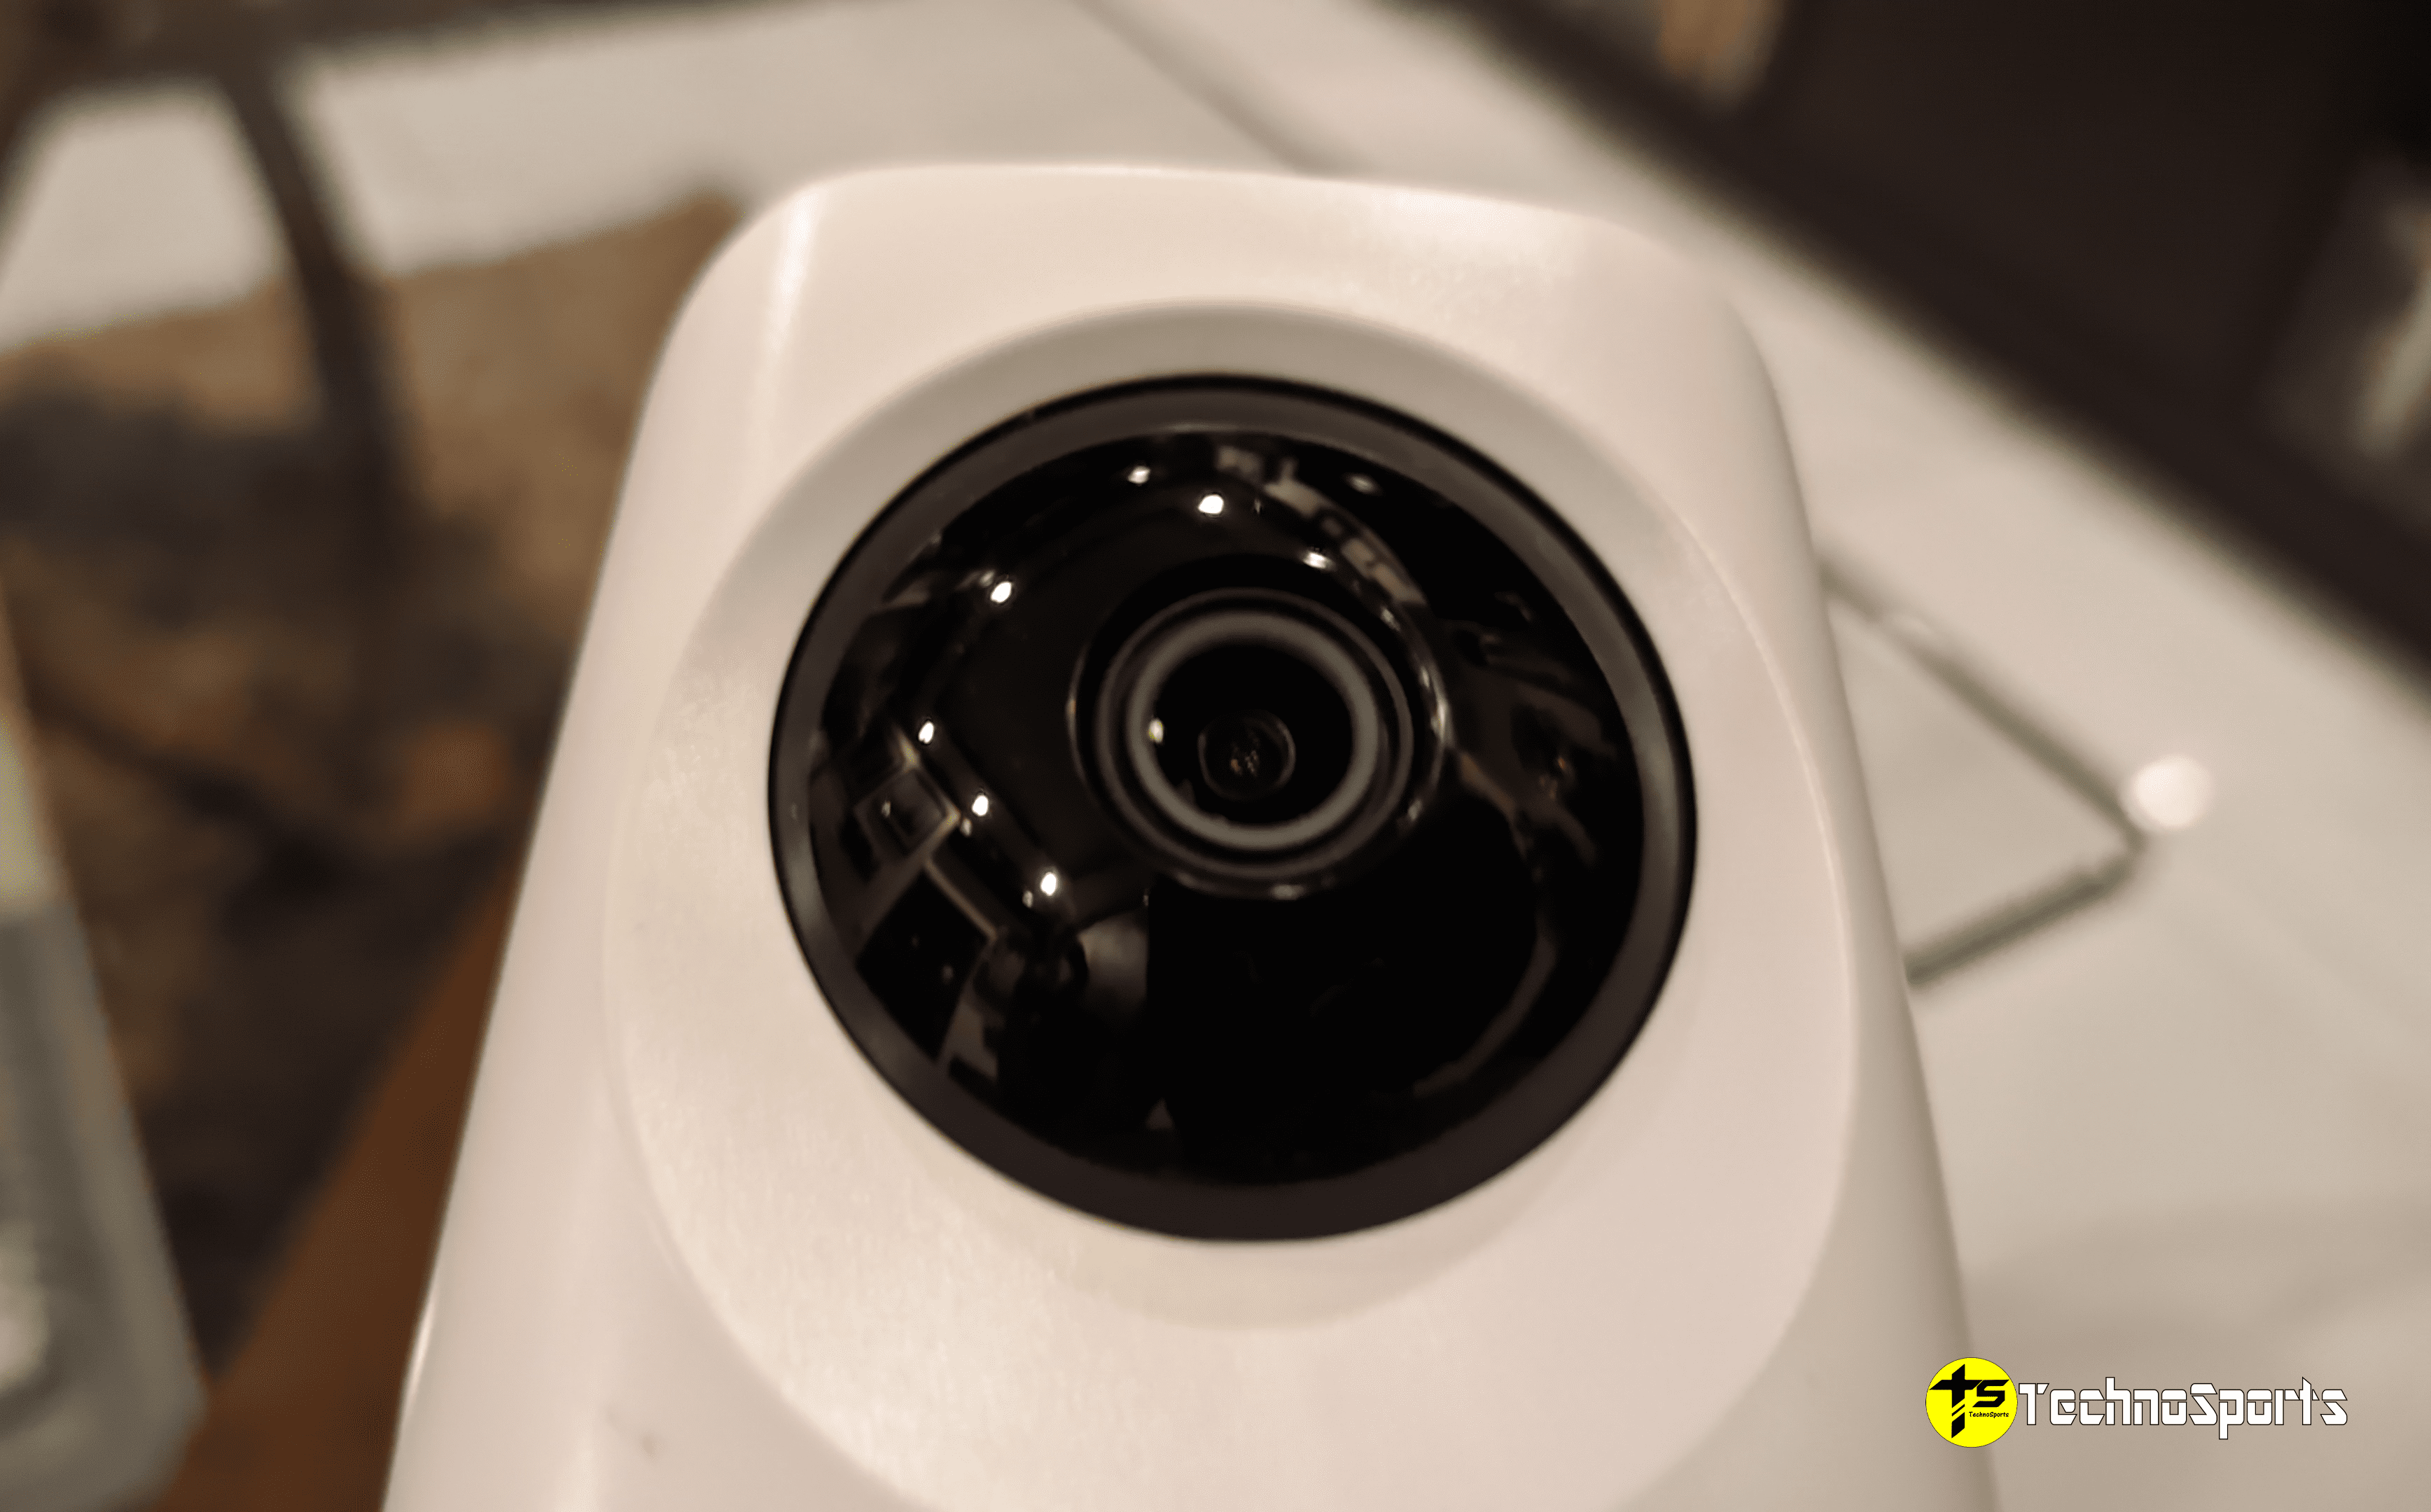 Kent HomeCam 360 Review 4 TechnoSports.co .in Kent HomeCam 360 Review: A Must Recommended Next-Gen Security Camera for your Home Security